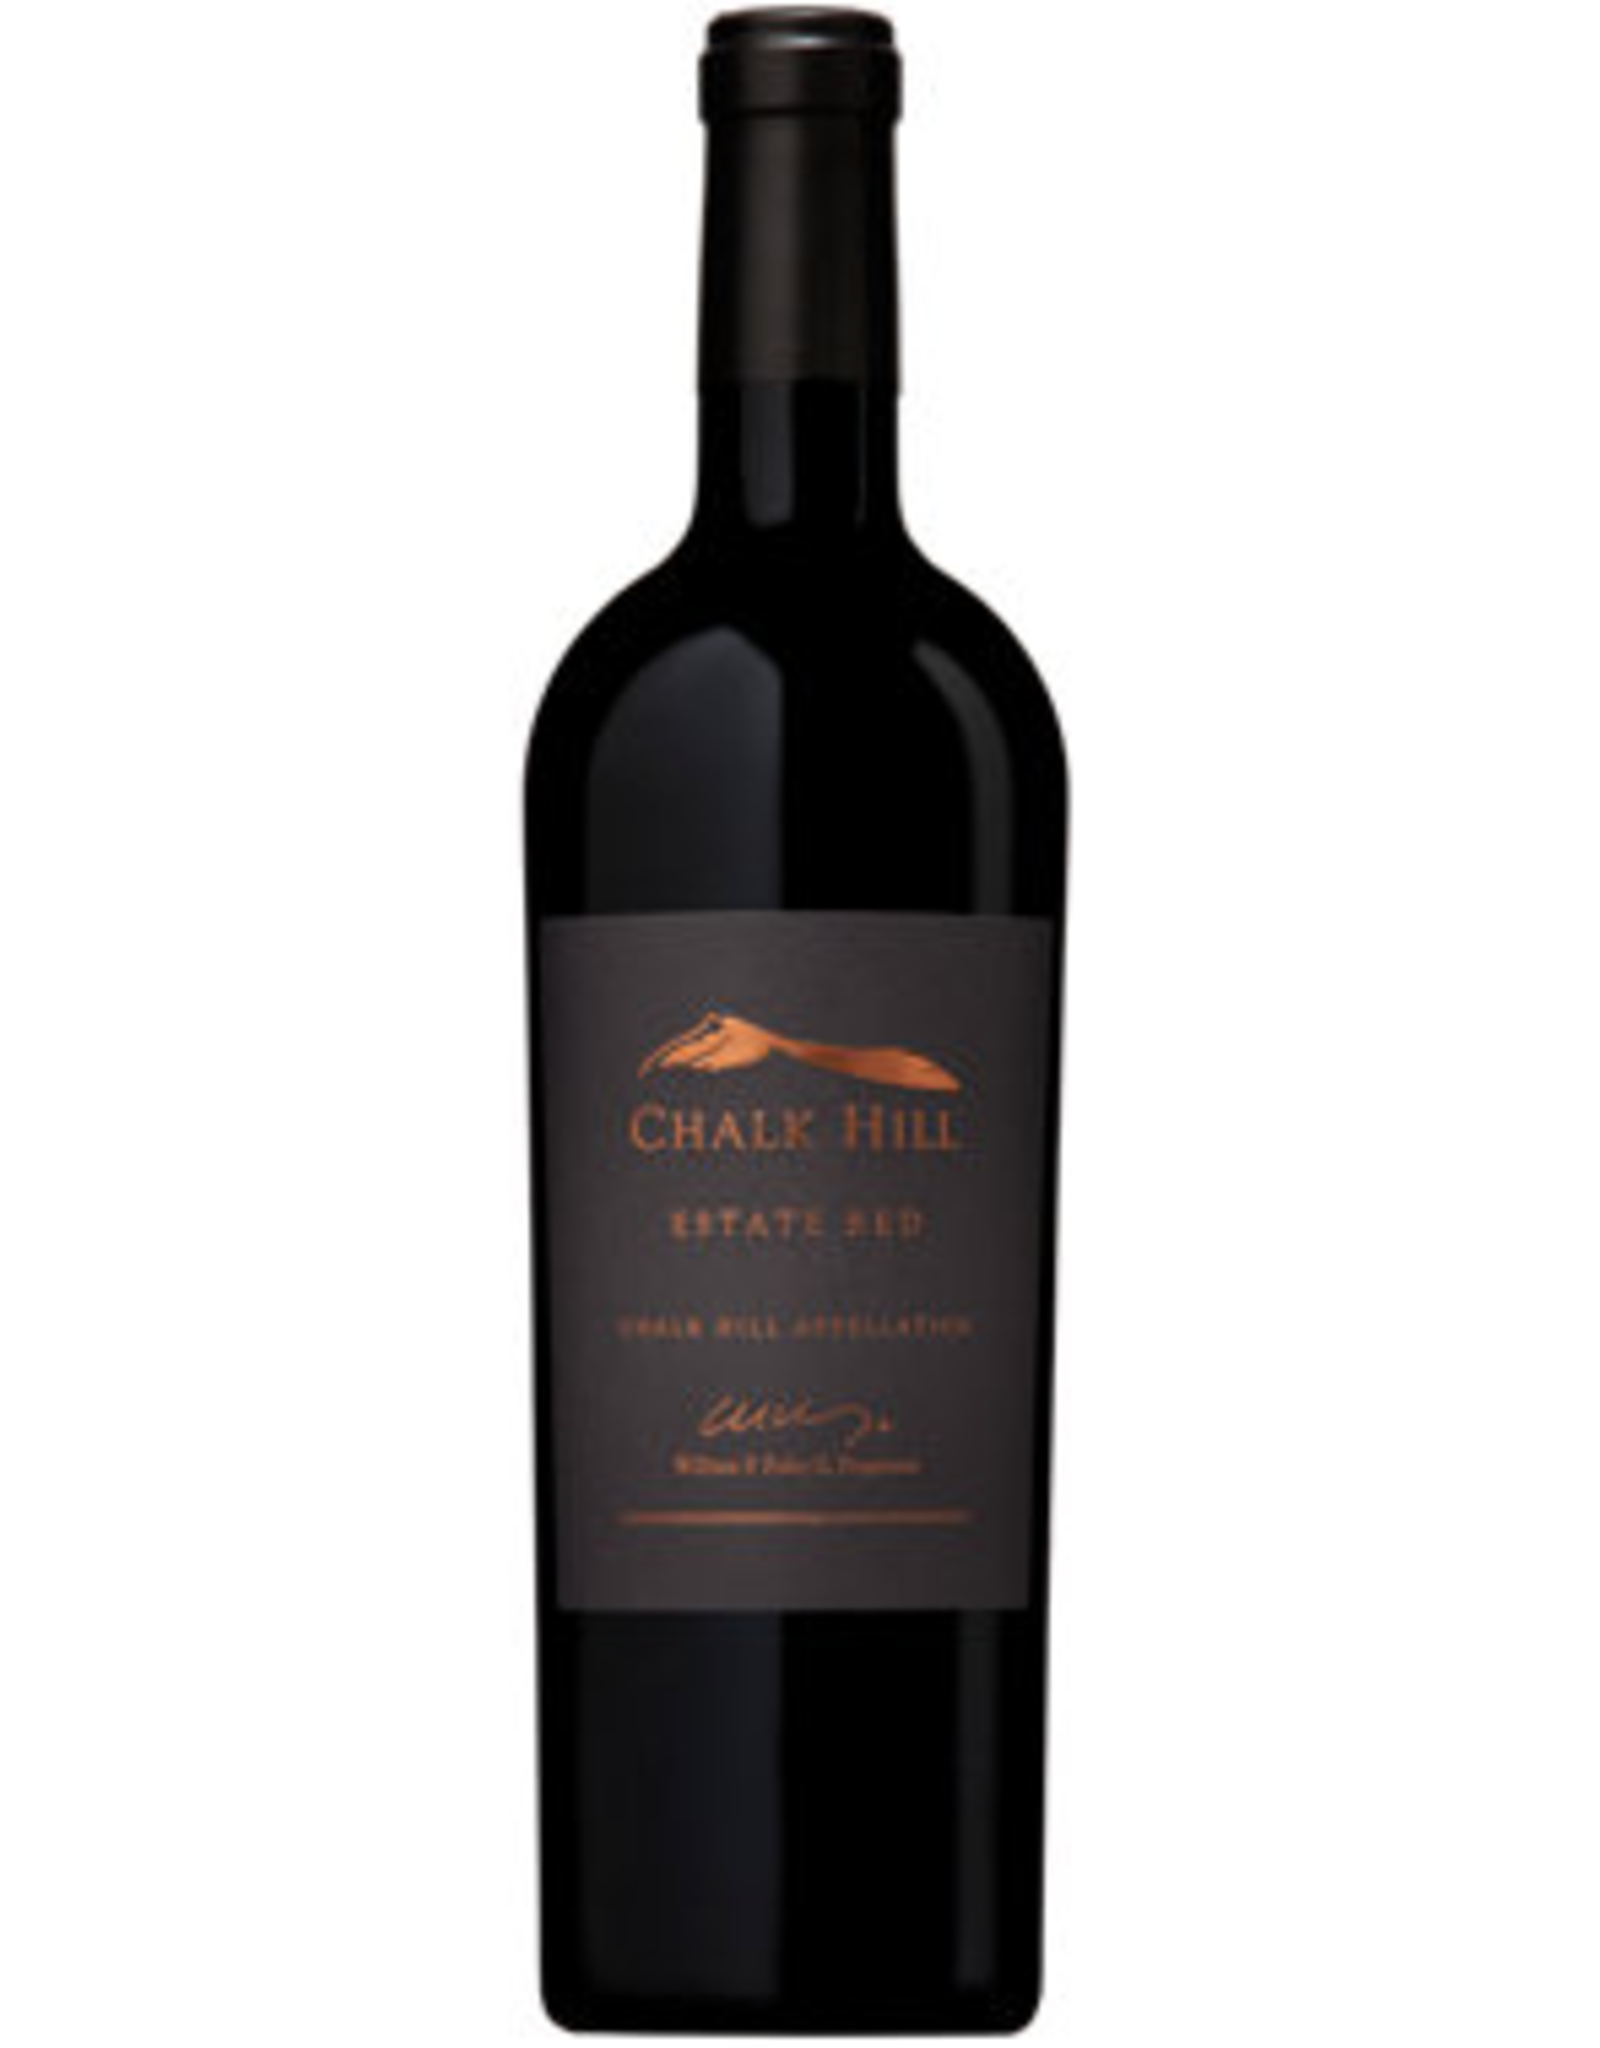 Red Wine 2011, Chalk Hill Estate Red, Red Bordeaux Blend, Chalk Hill, Sonoma County, California, 14% Alc, CT91, TW93